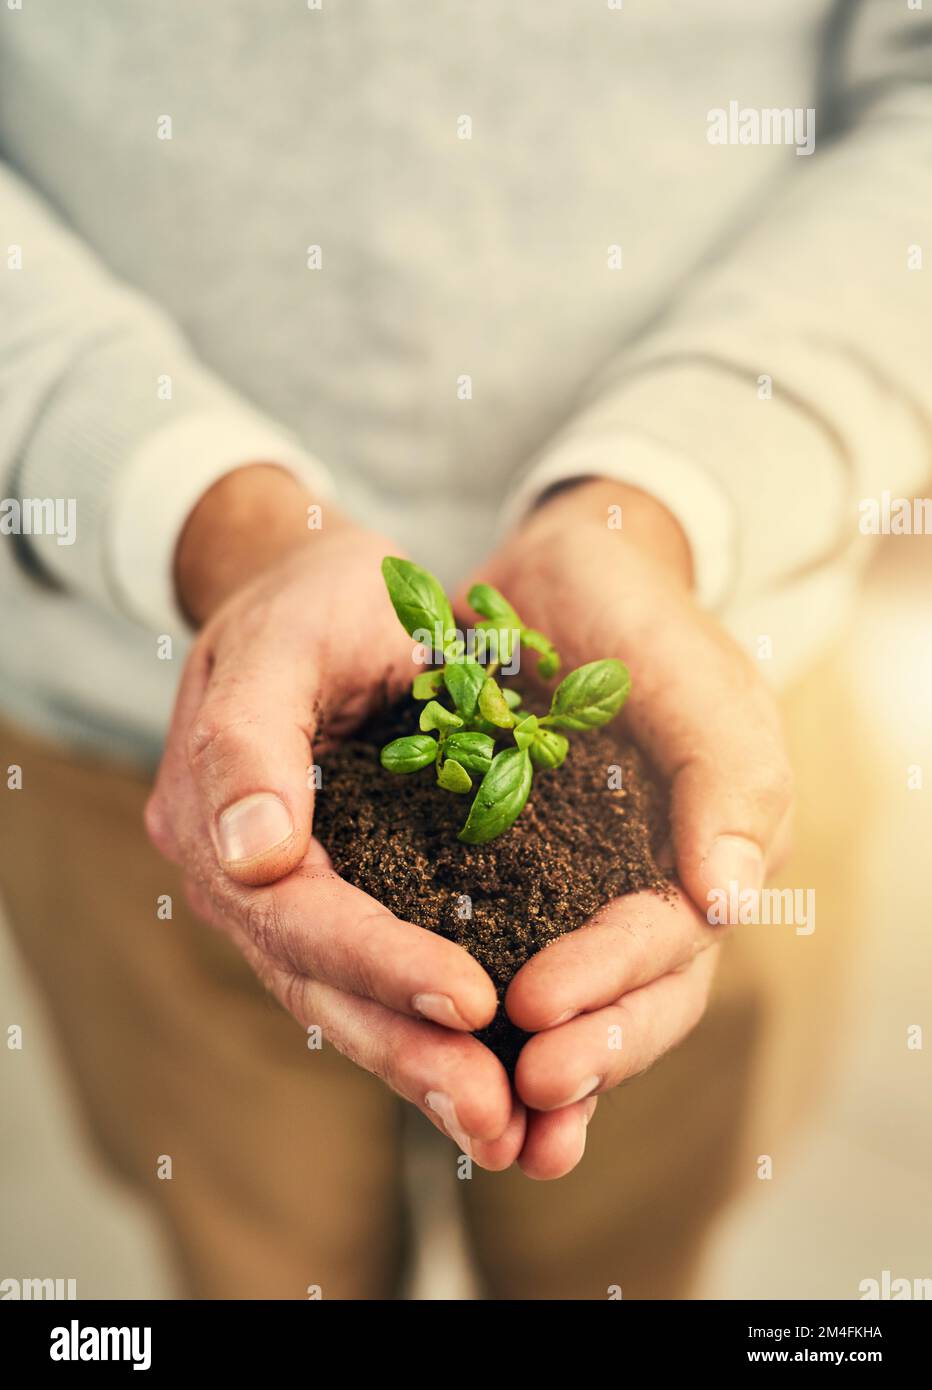 Growing something great. a businessman holding a plant growing out of soil. Stock Photo